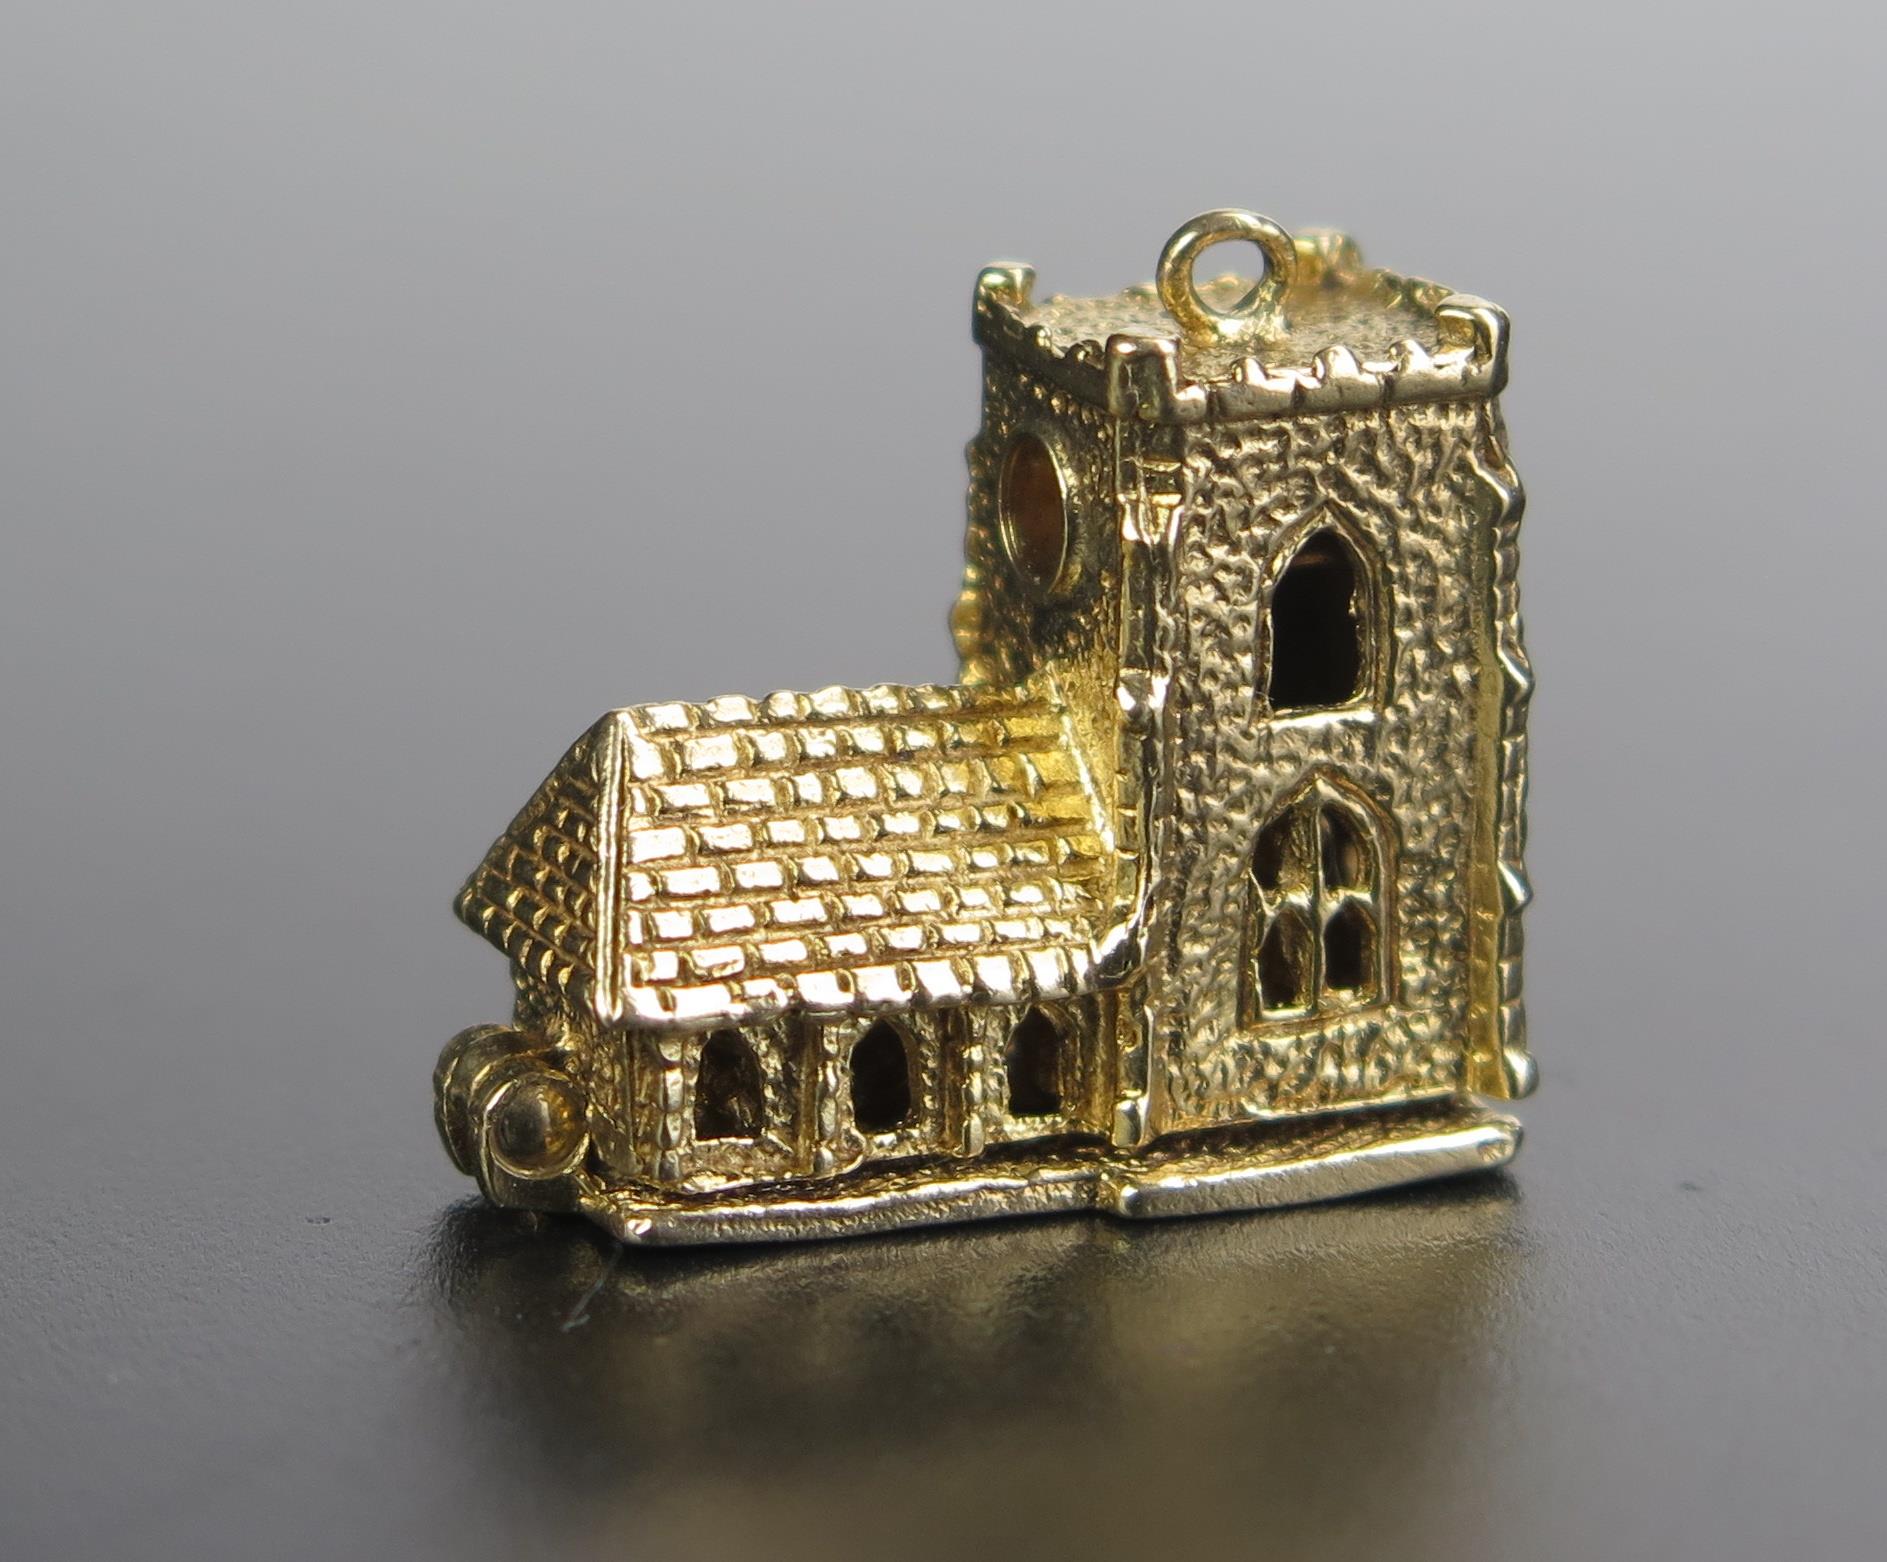 A Hallmarked 9ct Gold Church Charm with Stanhope of Marriage Vows and hinged base opening to